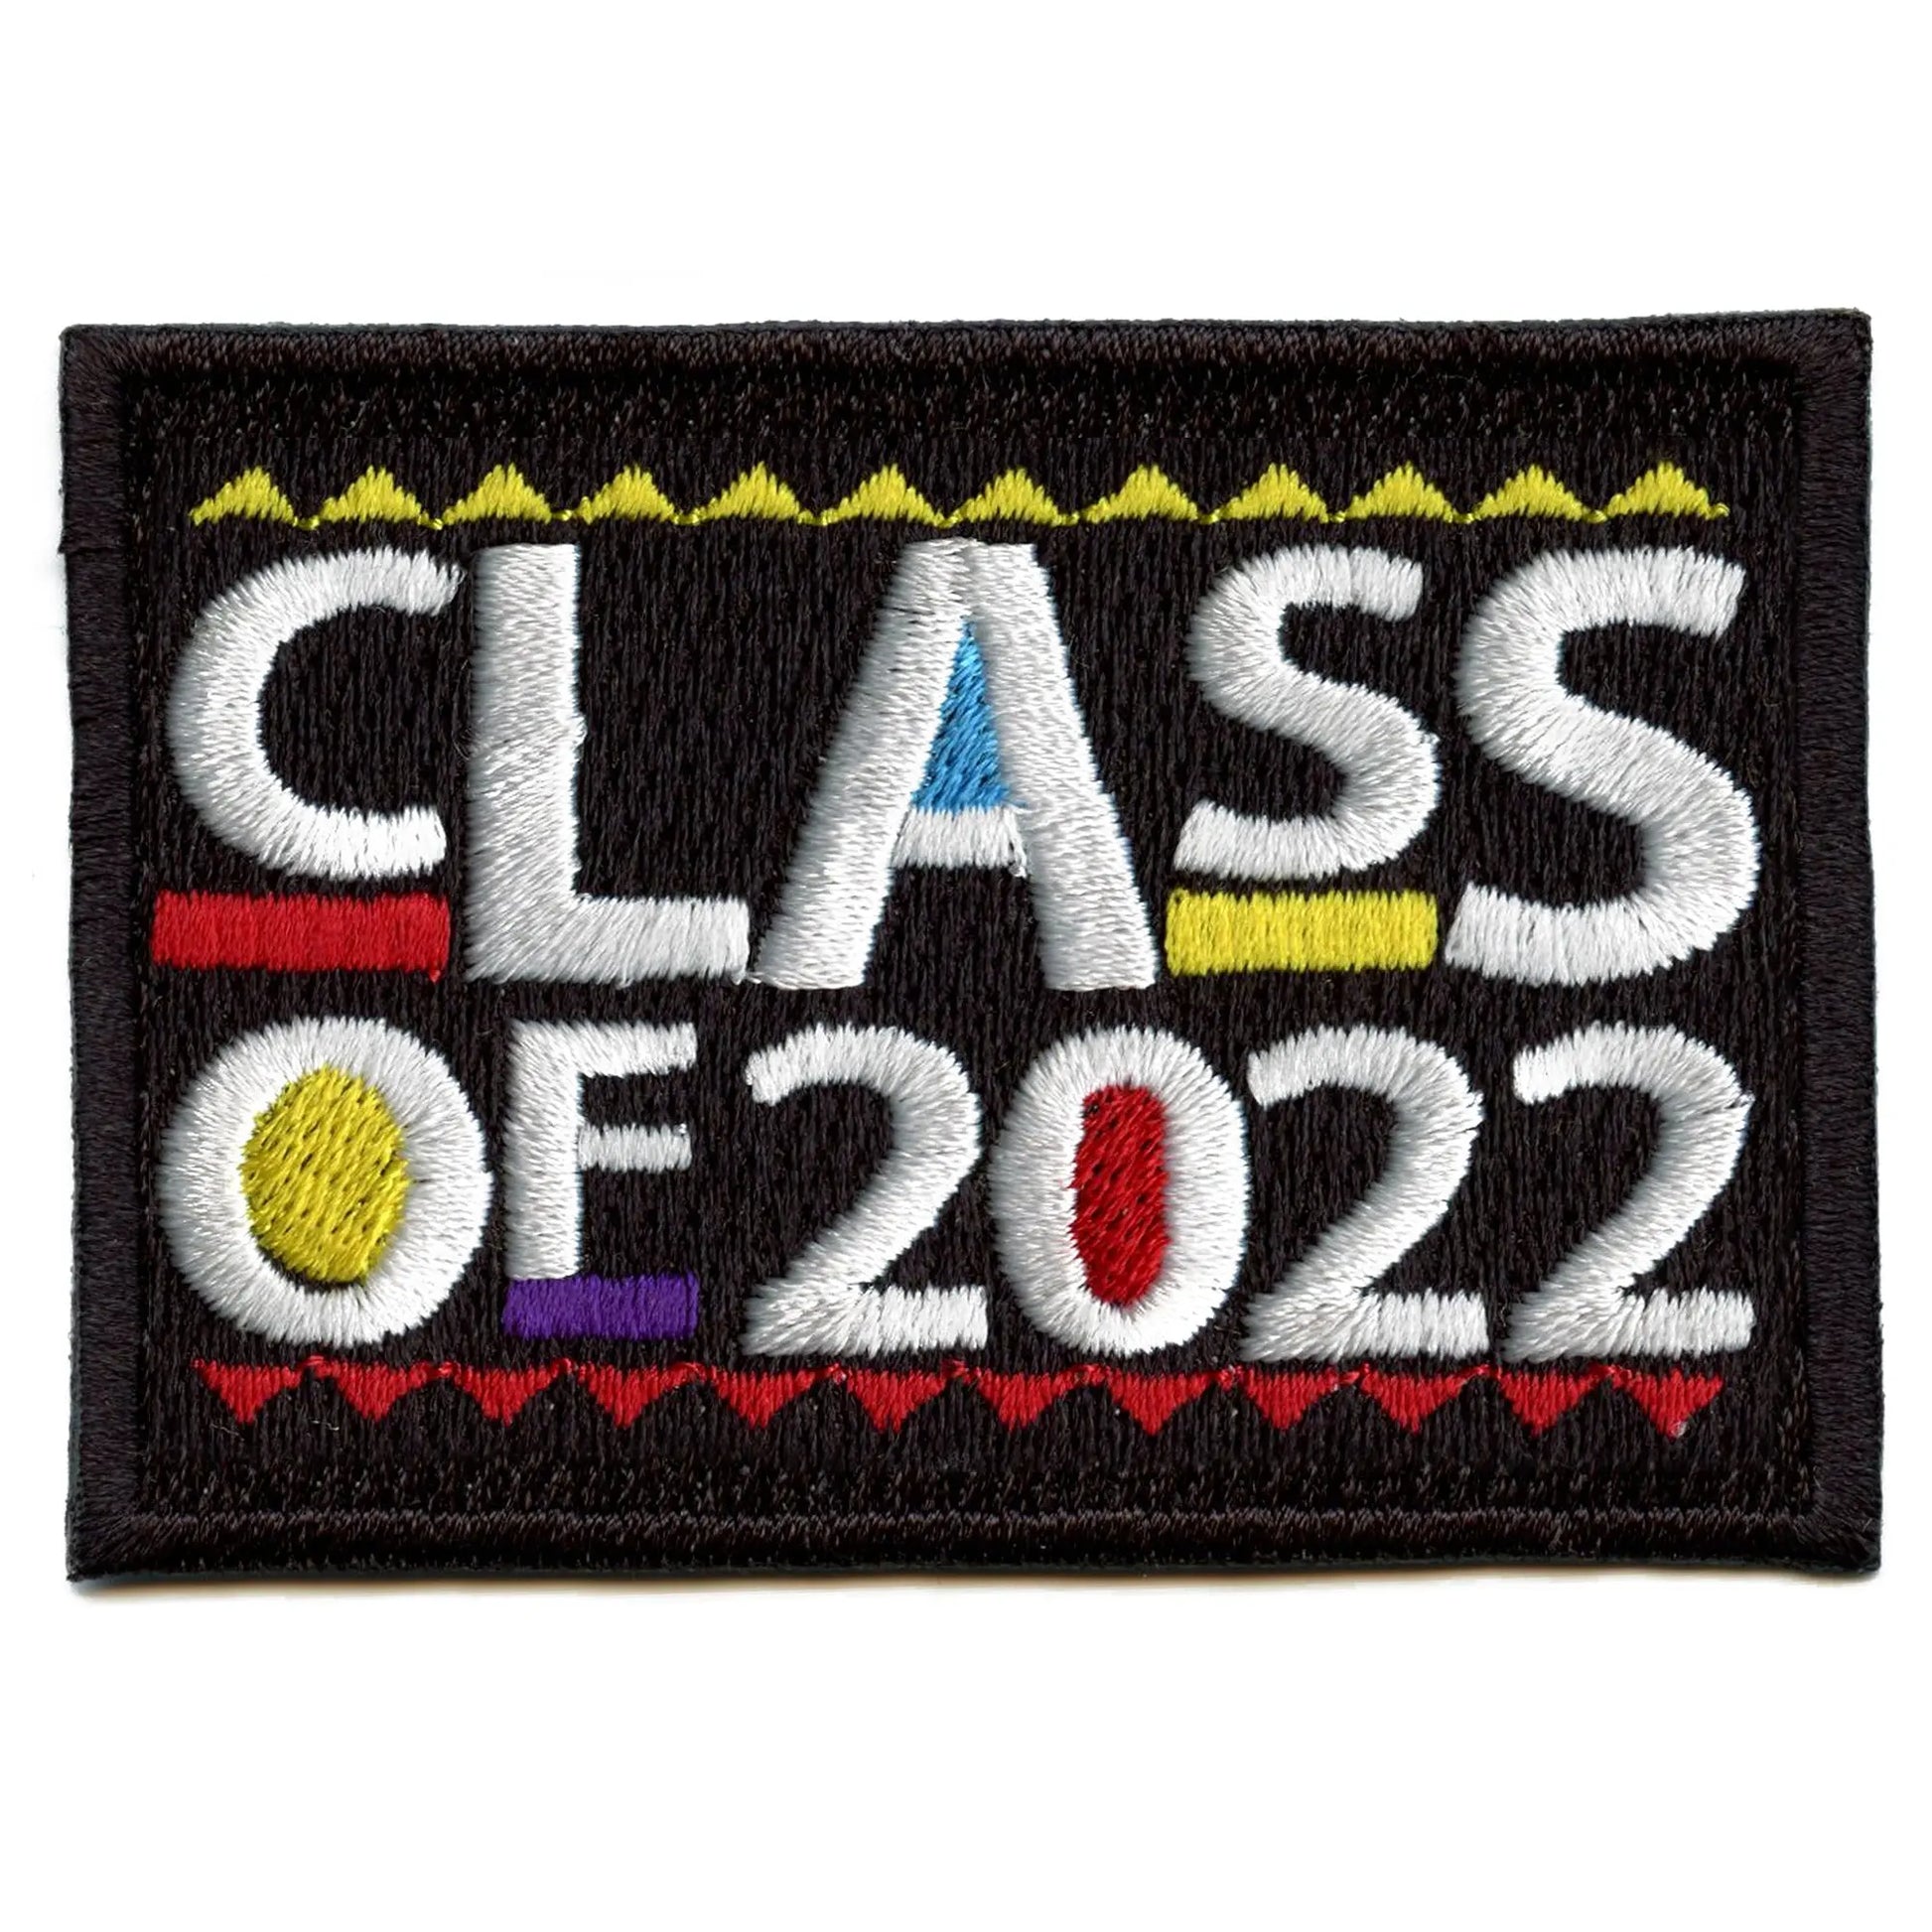 Class Of 2022 HBCU Box Logo Embroidered Iron On Patch 